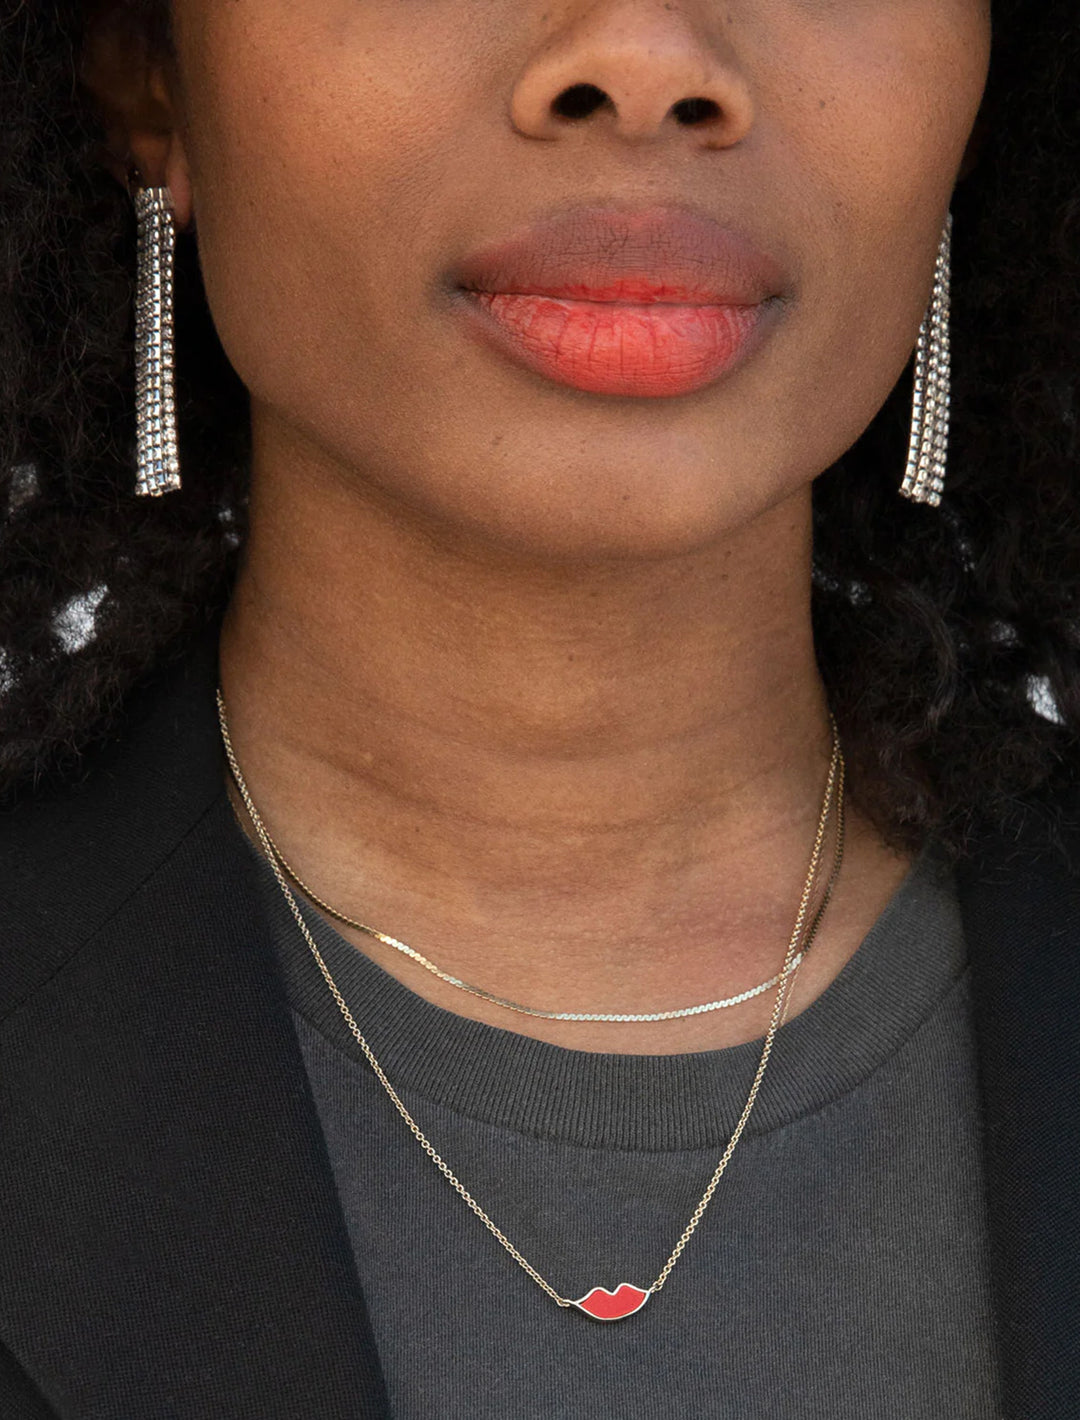 Model wearing Clare V.'s Lips Necklace in Gold.